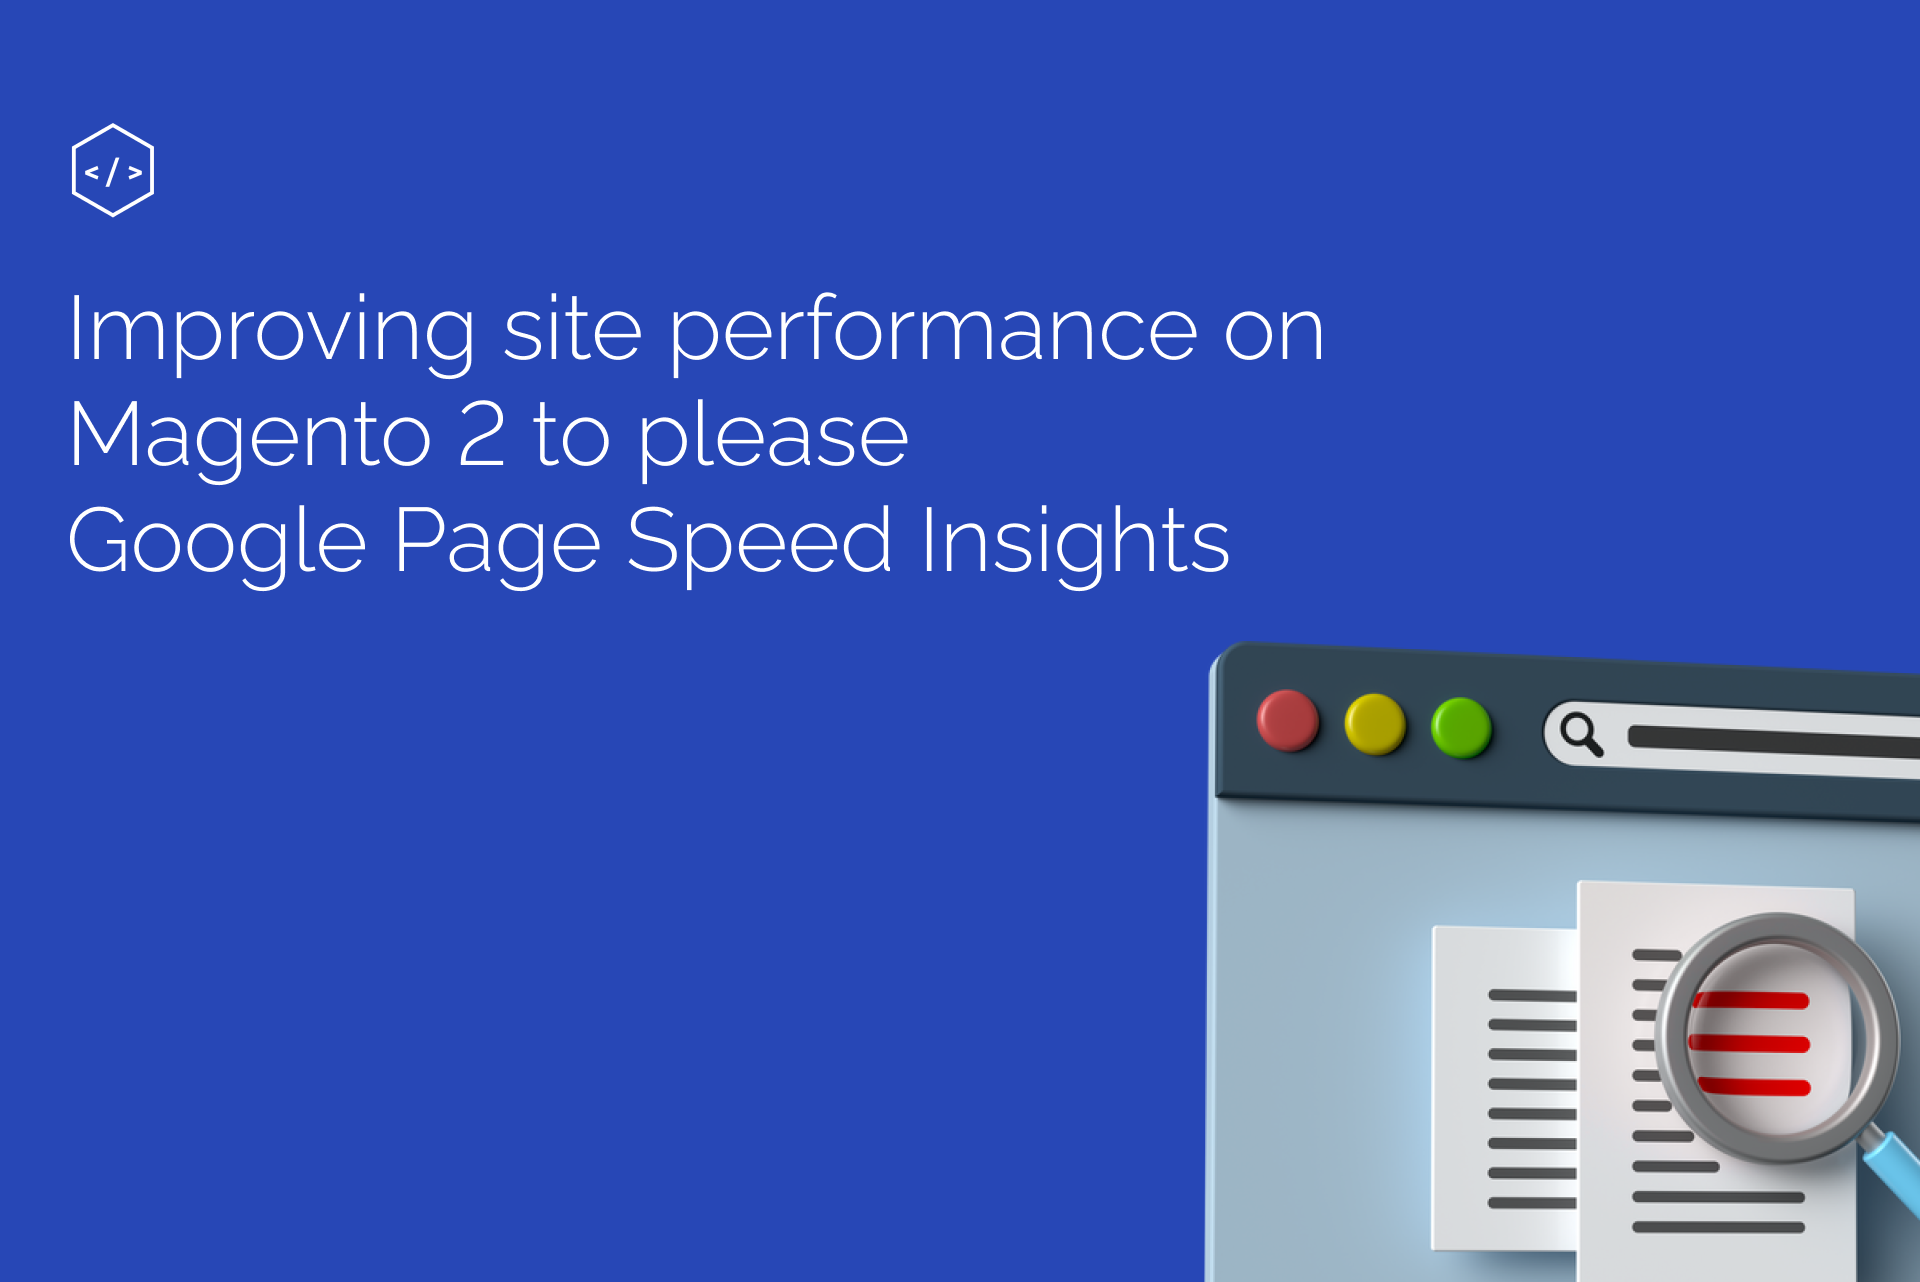 How to improve Magento 2 Page Speed Insights Score?